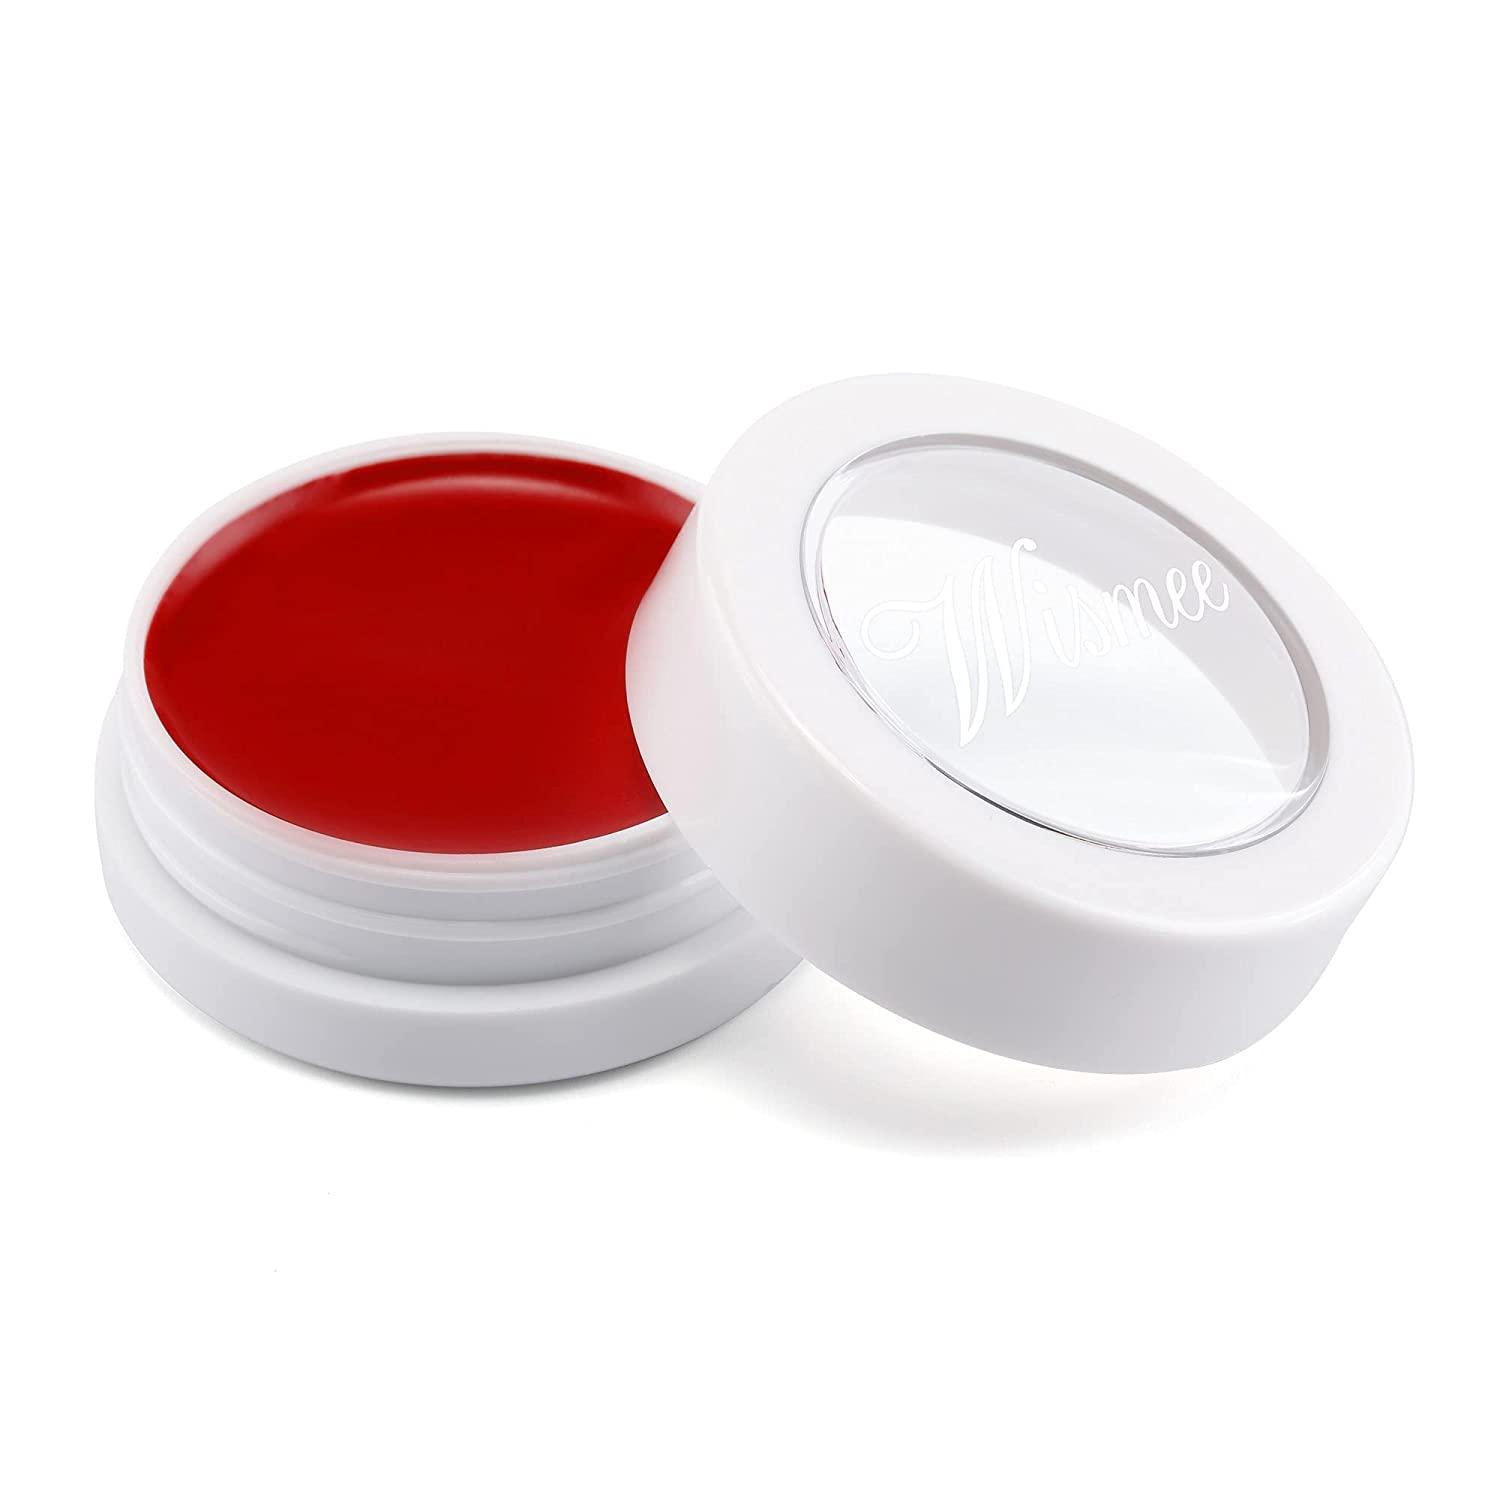  Red Face Body Paint Stick (0.75Oz)  Red Face Paint, Body Paint,  & Foundation Cream Makeup : Beauty & Personal Care